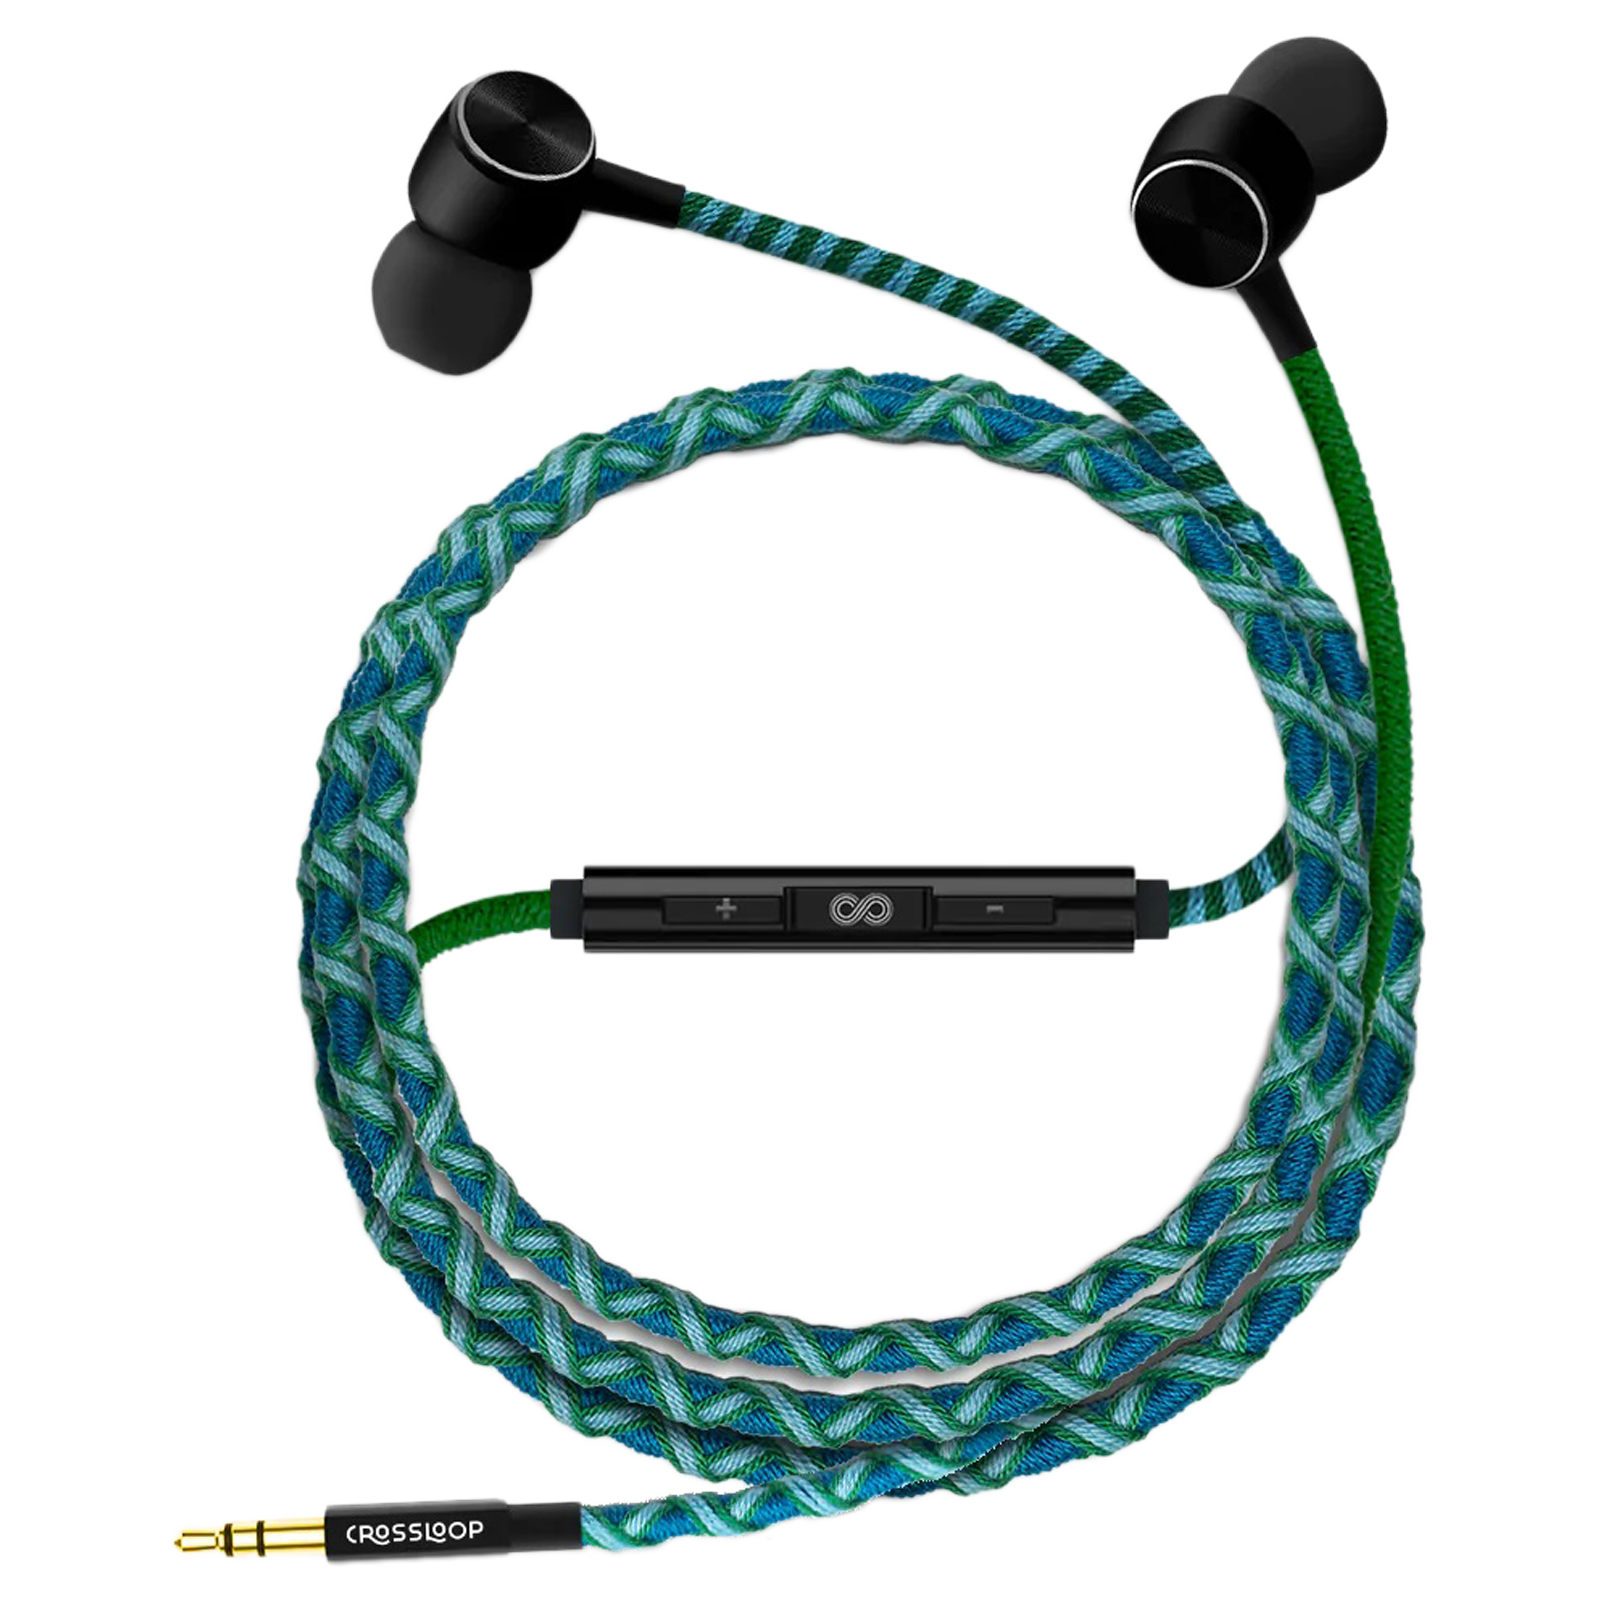 CROSSLOOP Pro Series CSLE019-E Earphone with Mic (In Ear, Green and Blue)